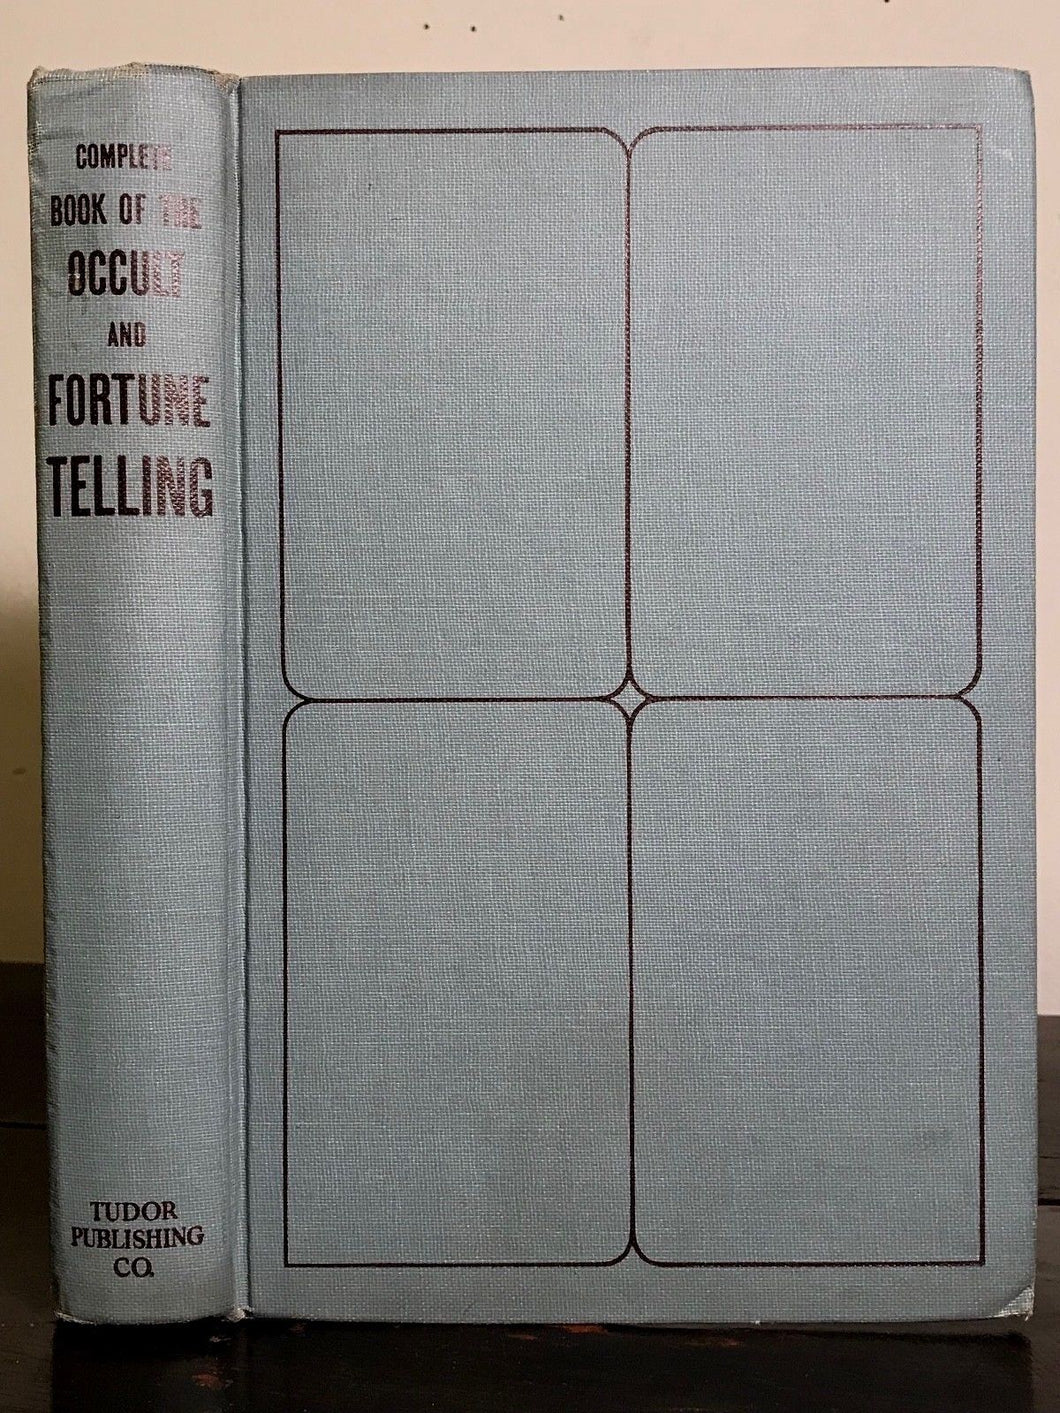 THE COMPLETE BOOK OF THE OCCULT AND FORTUNE TELLING - M.C. POINSOT, 1st/1st 1945